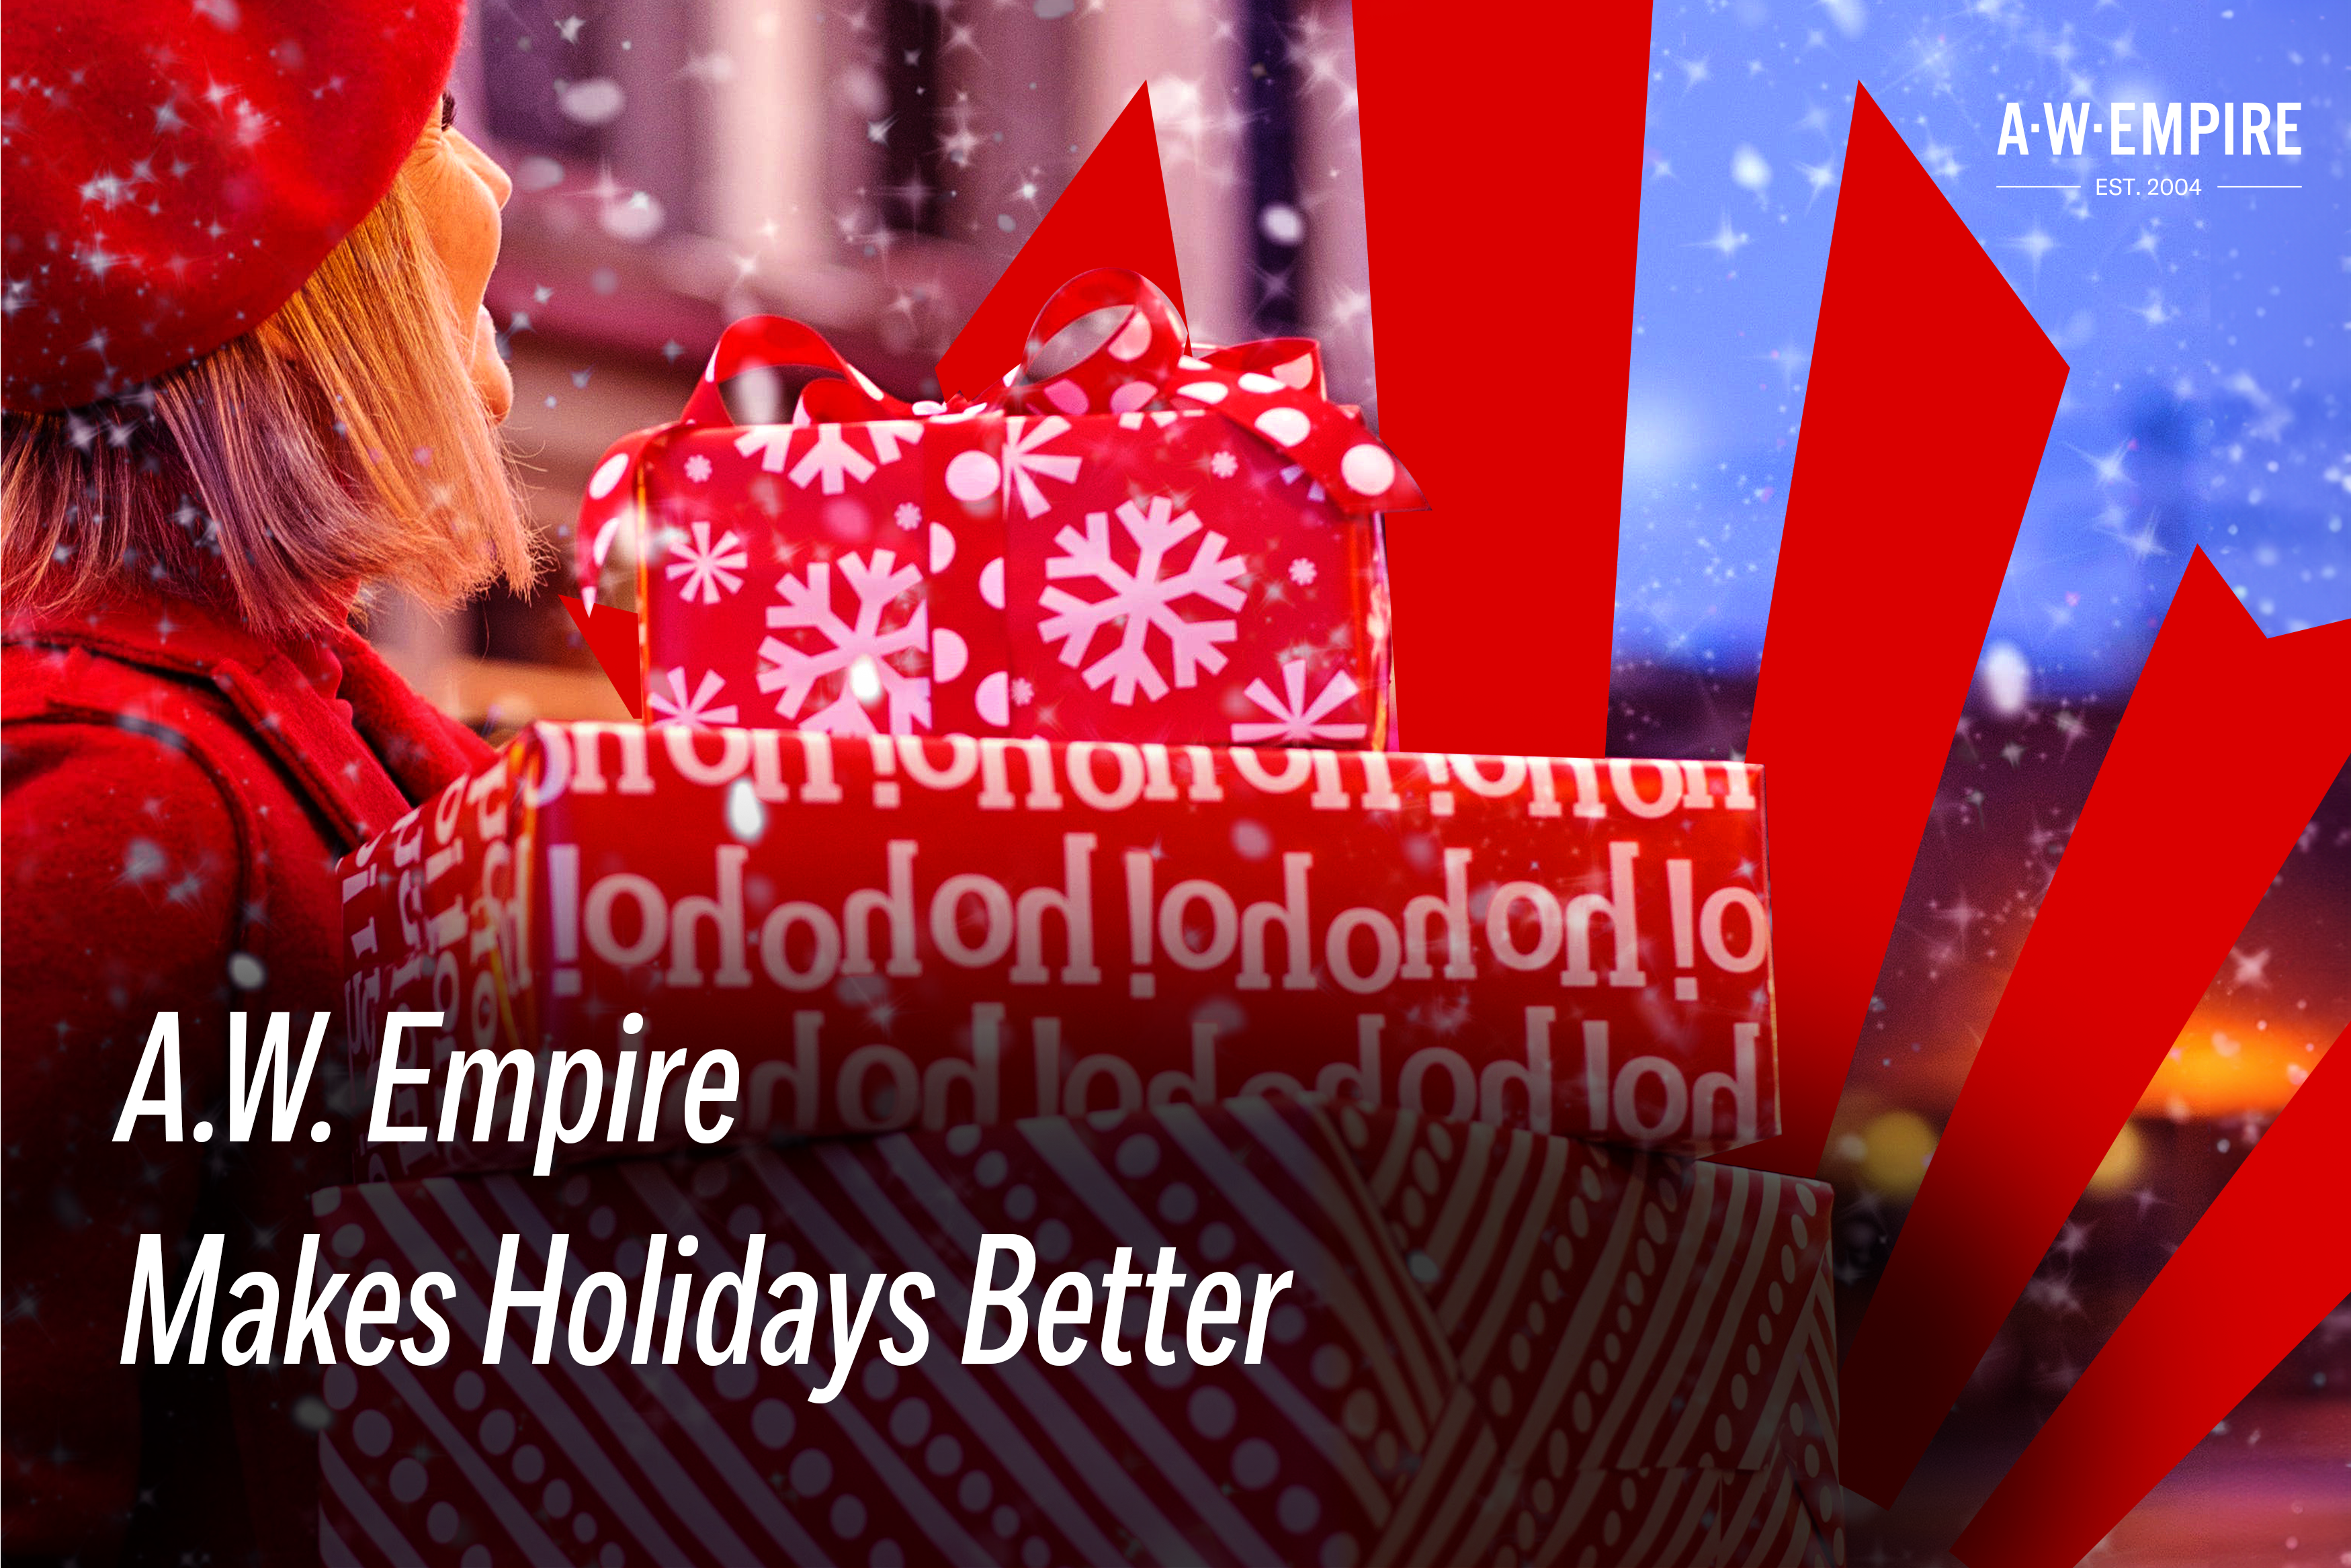 A.W. Empire Makes Holidays Better